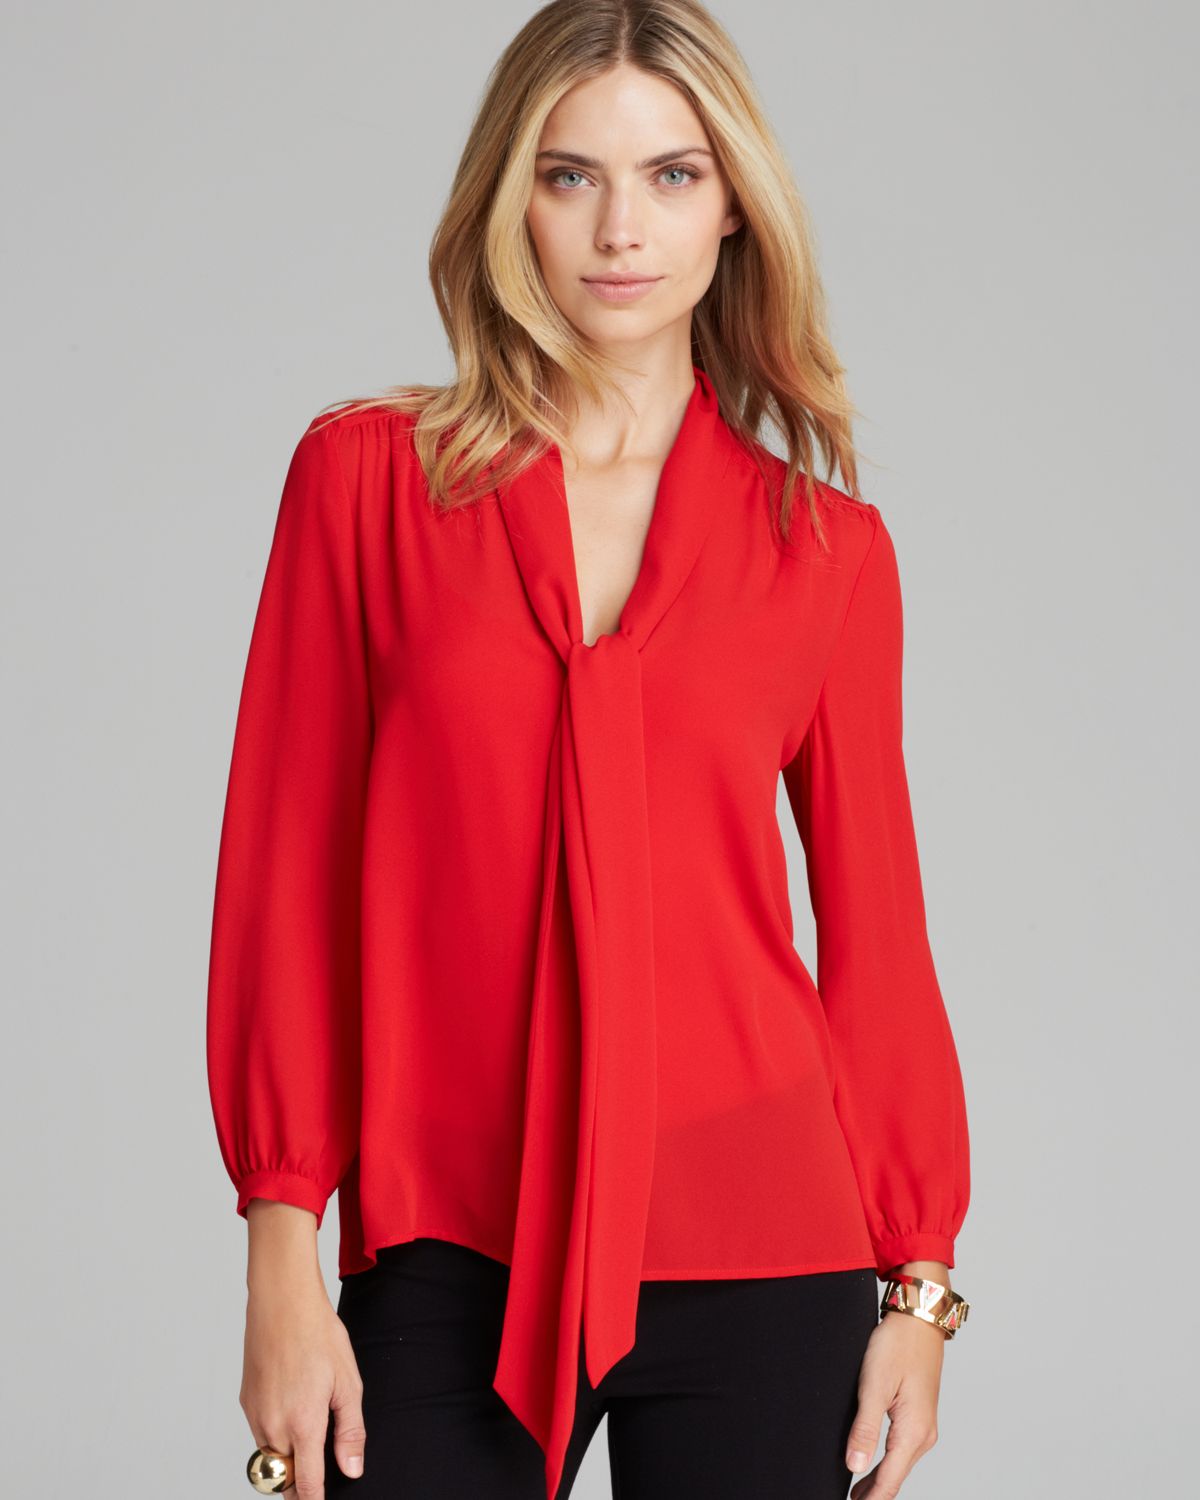 Lyst Juicy Couture Blouse  Neck Tie  in Red